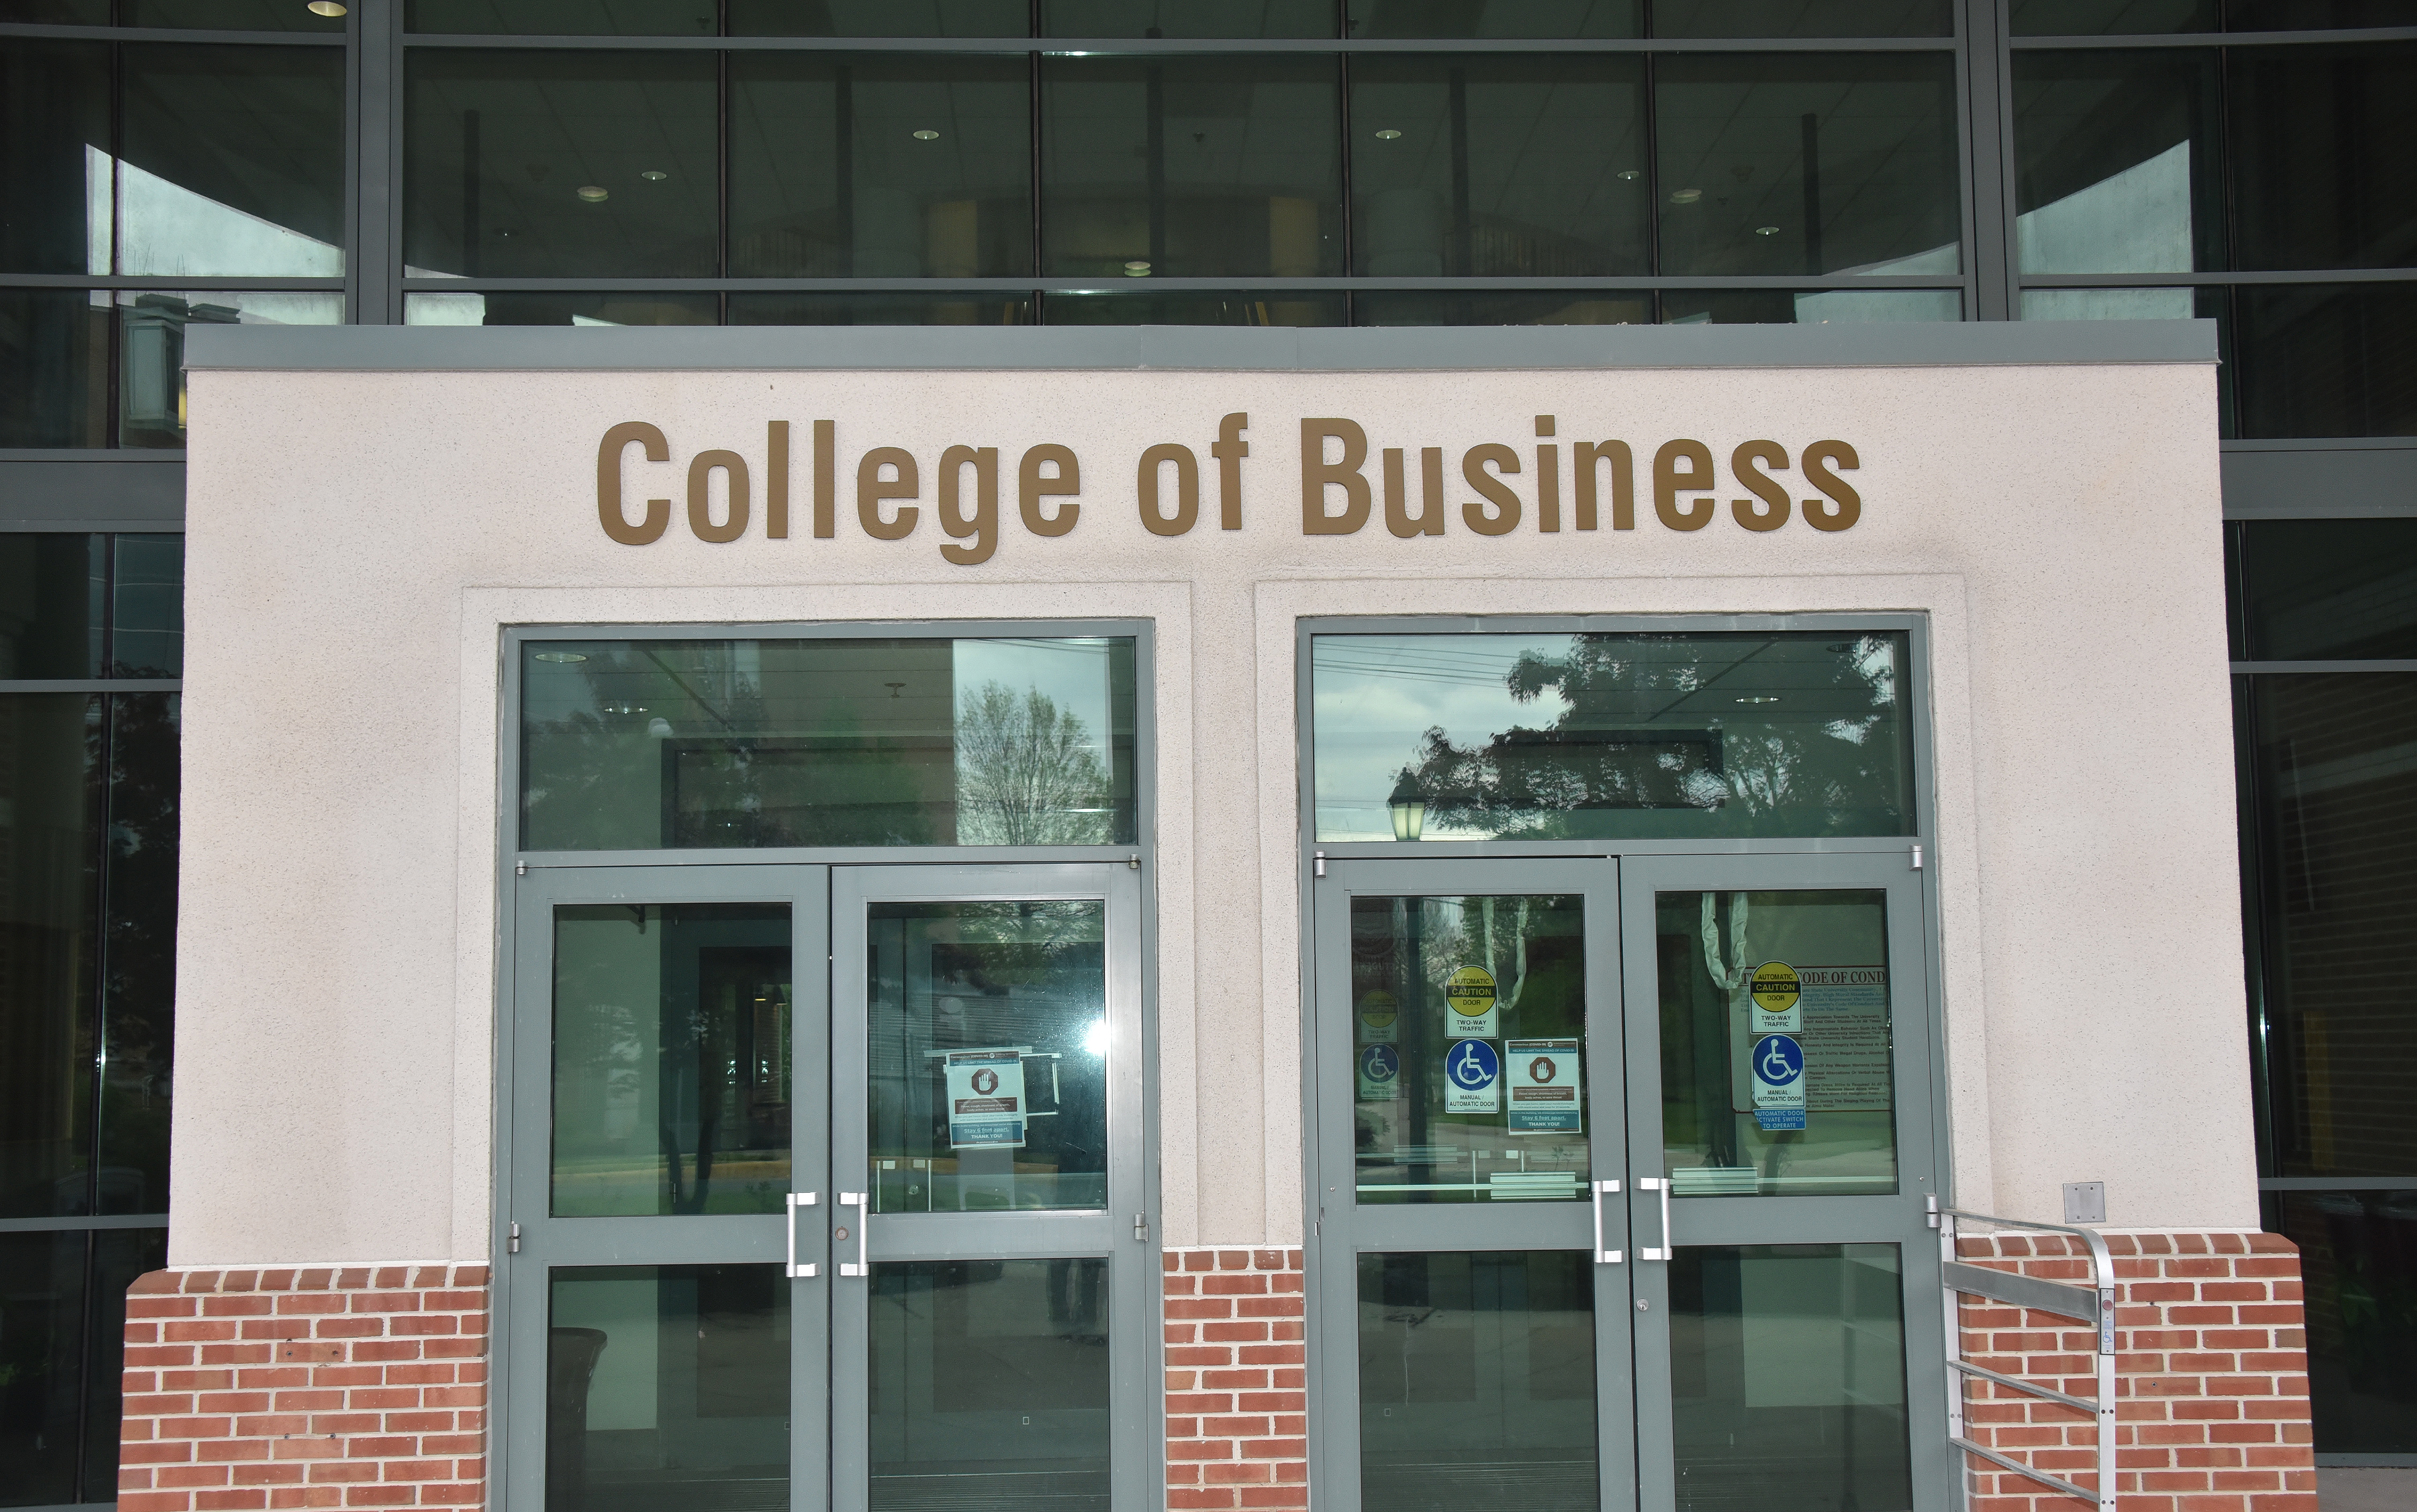 The College of Business has been awarded a four-year, $900,000 grant to develop and implement a Black Male Initiative on campus.